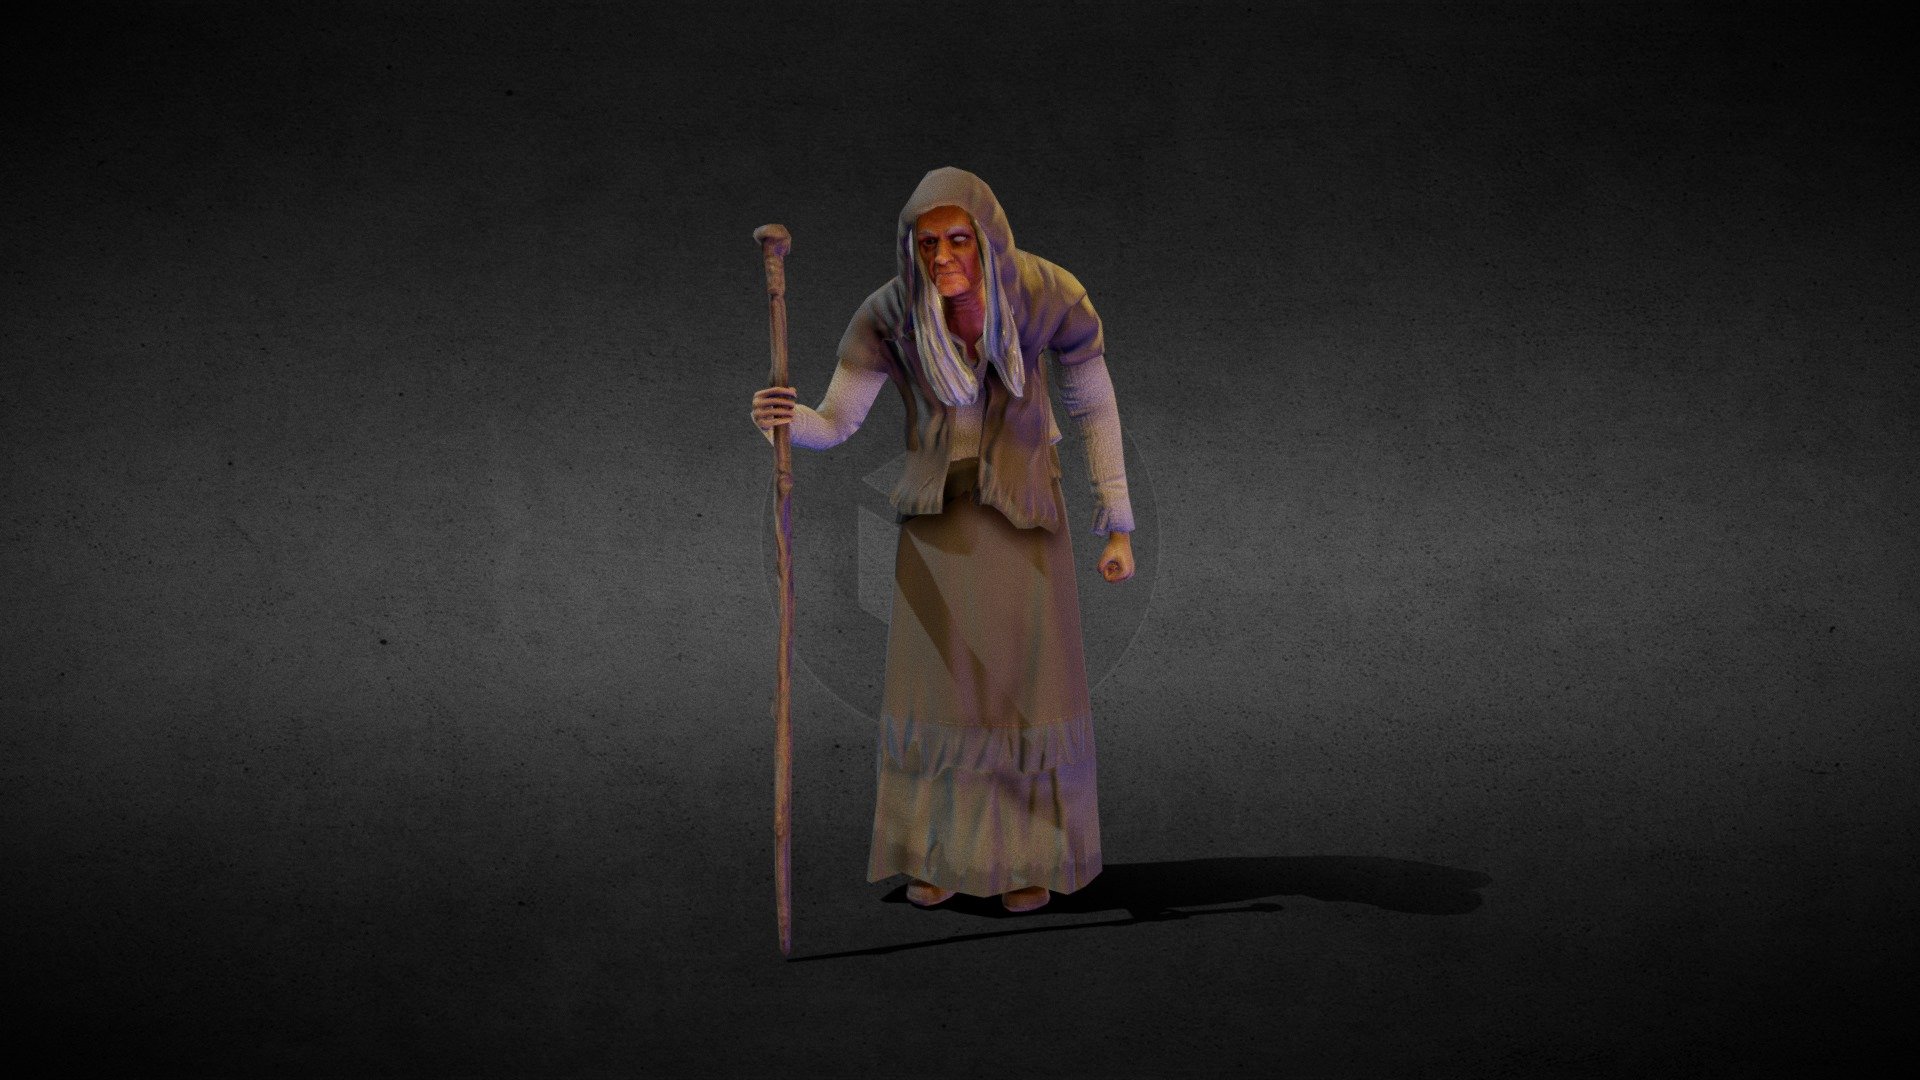 Witch
Ready for games.
Basic animated and rigg 3d model